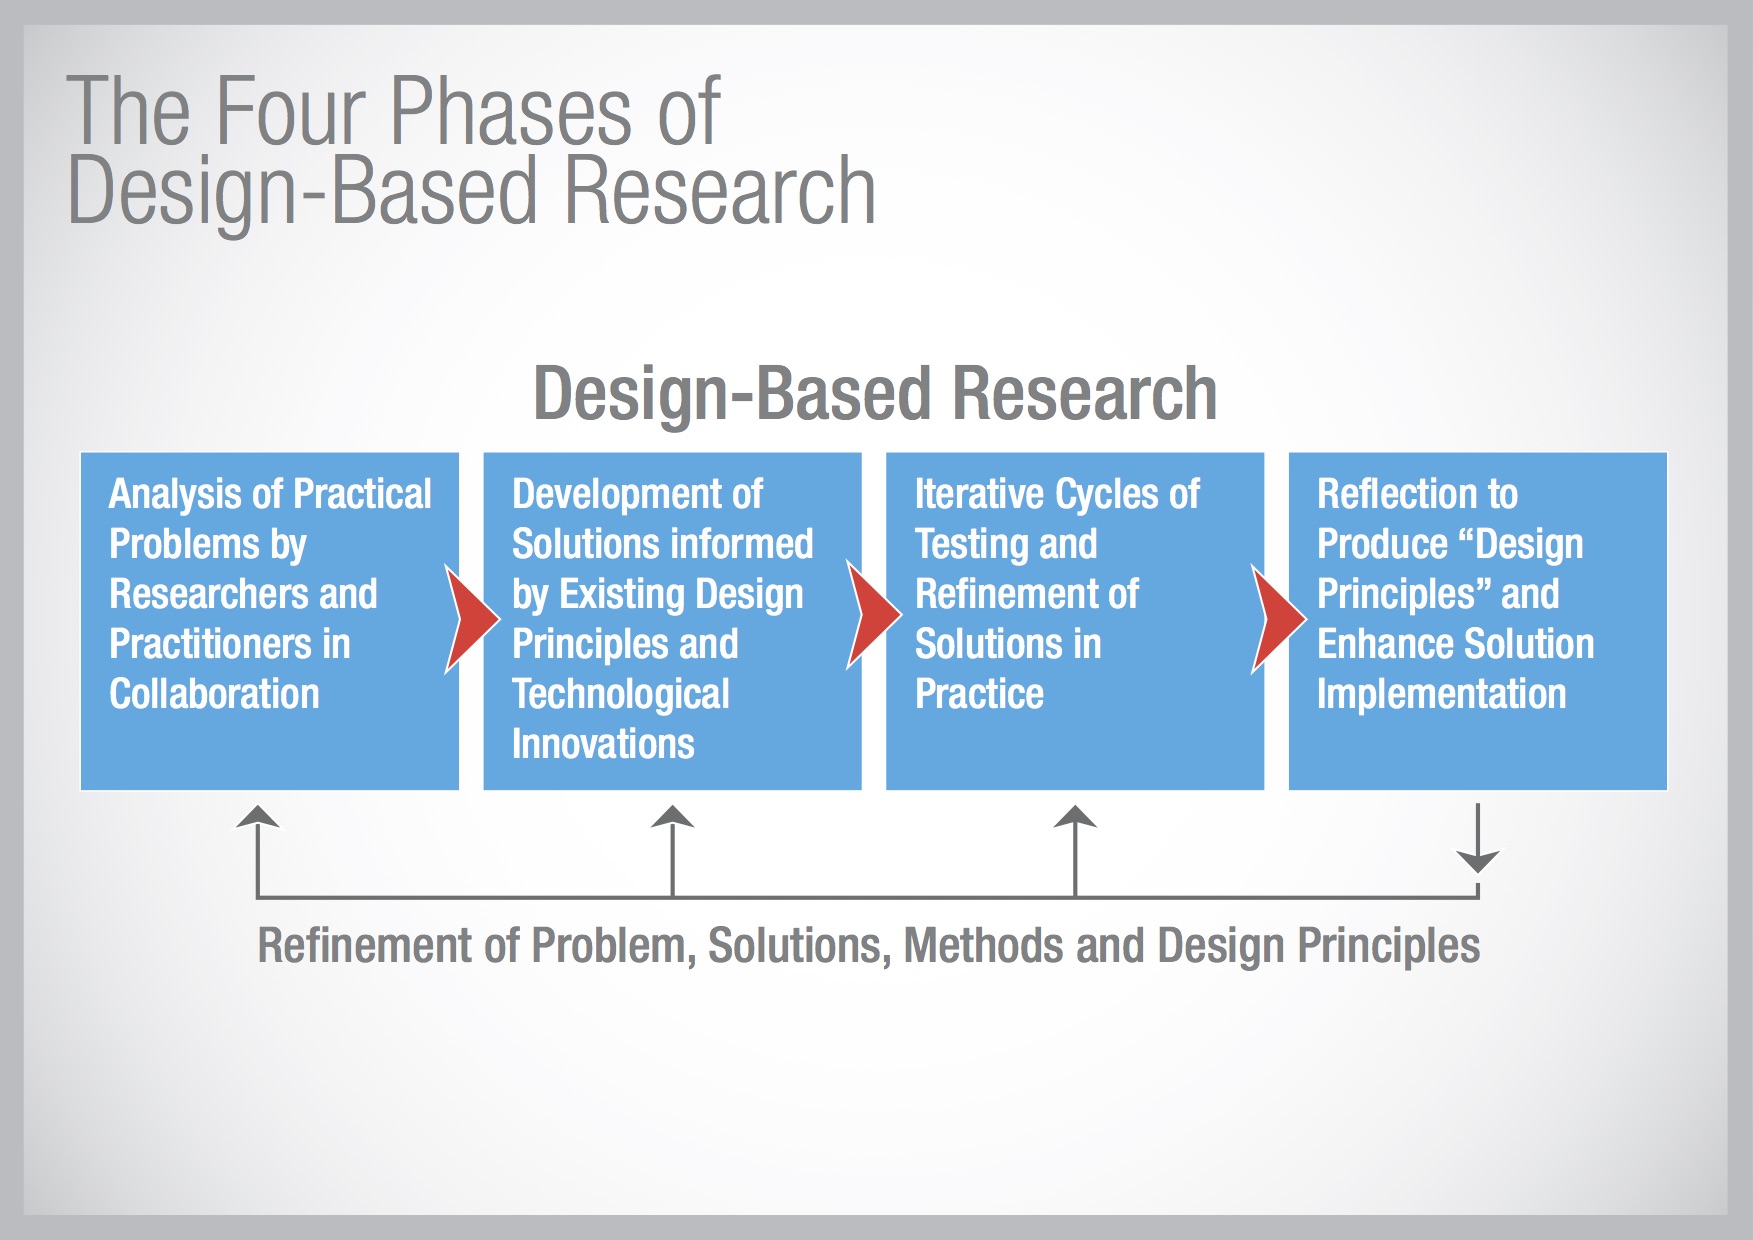 design based research lessons